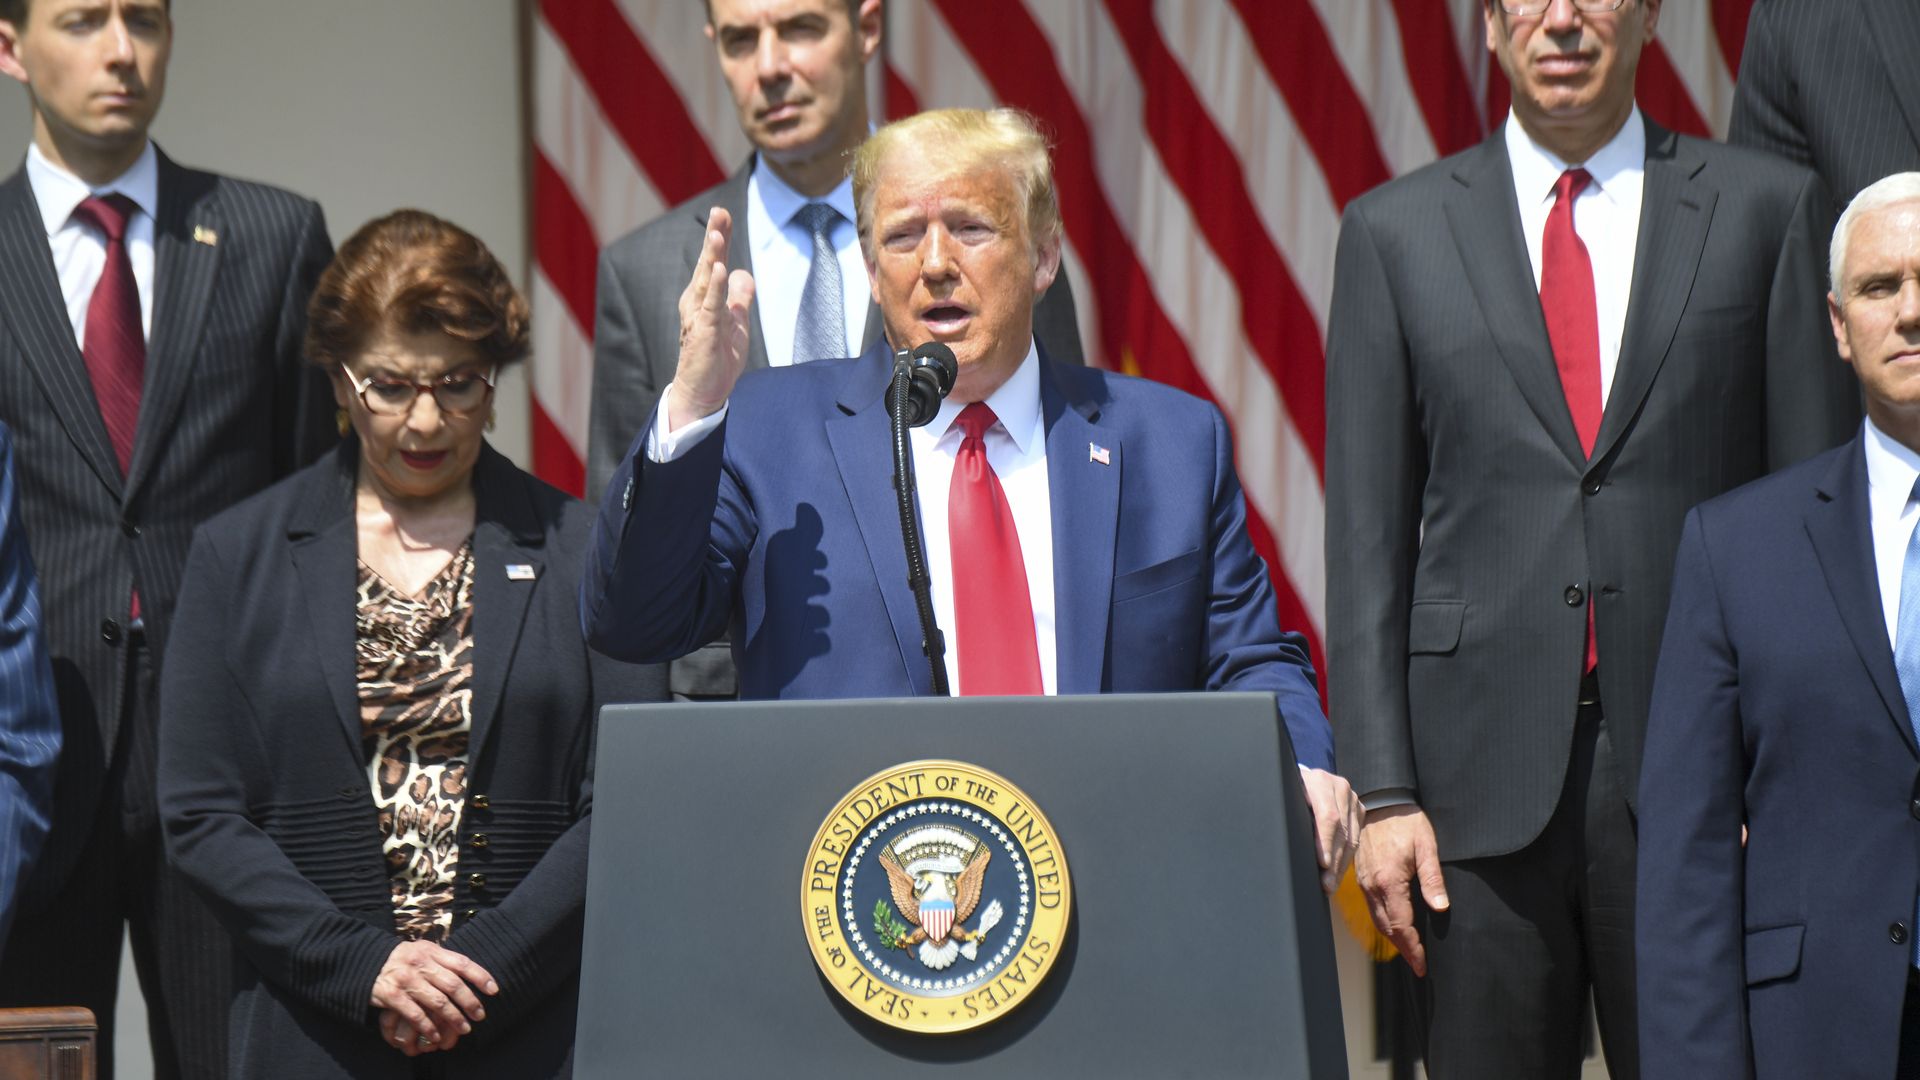 President Trump speaking in the Rose Garden following the release of the jobs report on May 5, 2020